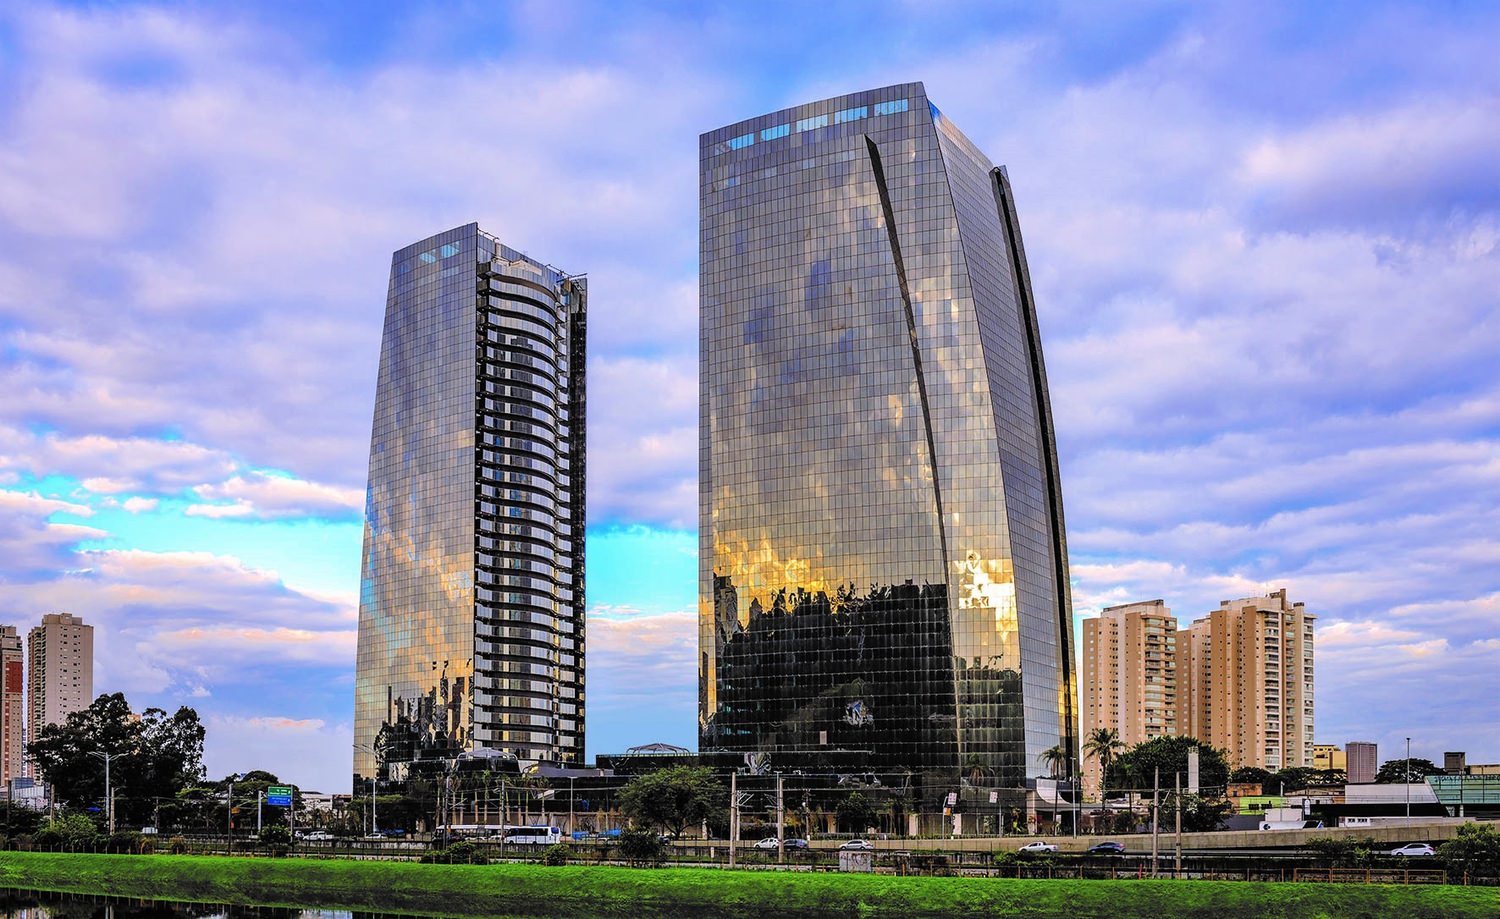 A row of tall skyscraper buildings with clouds in the blue sky in the background.